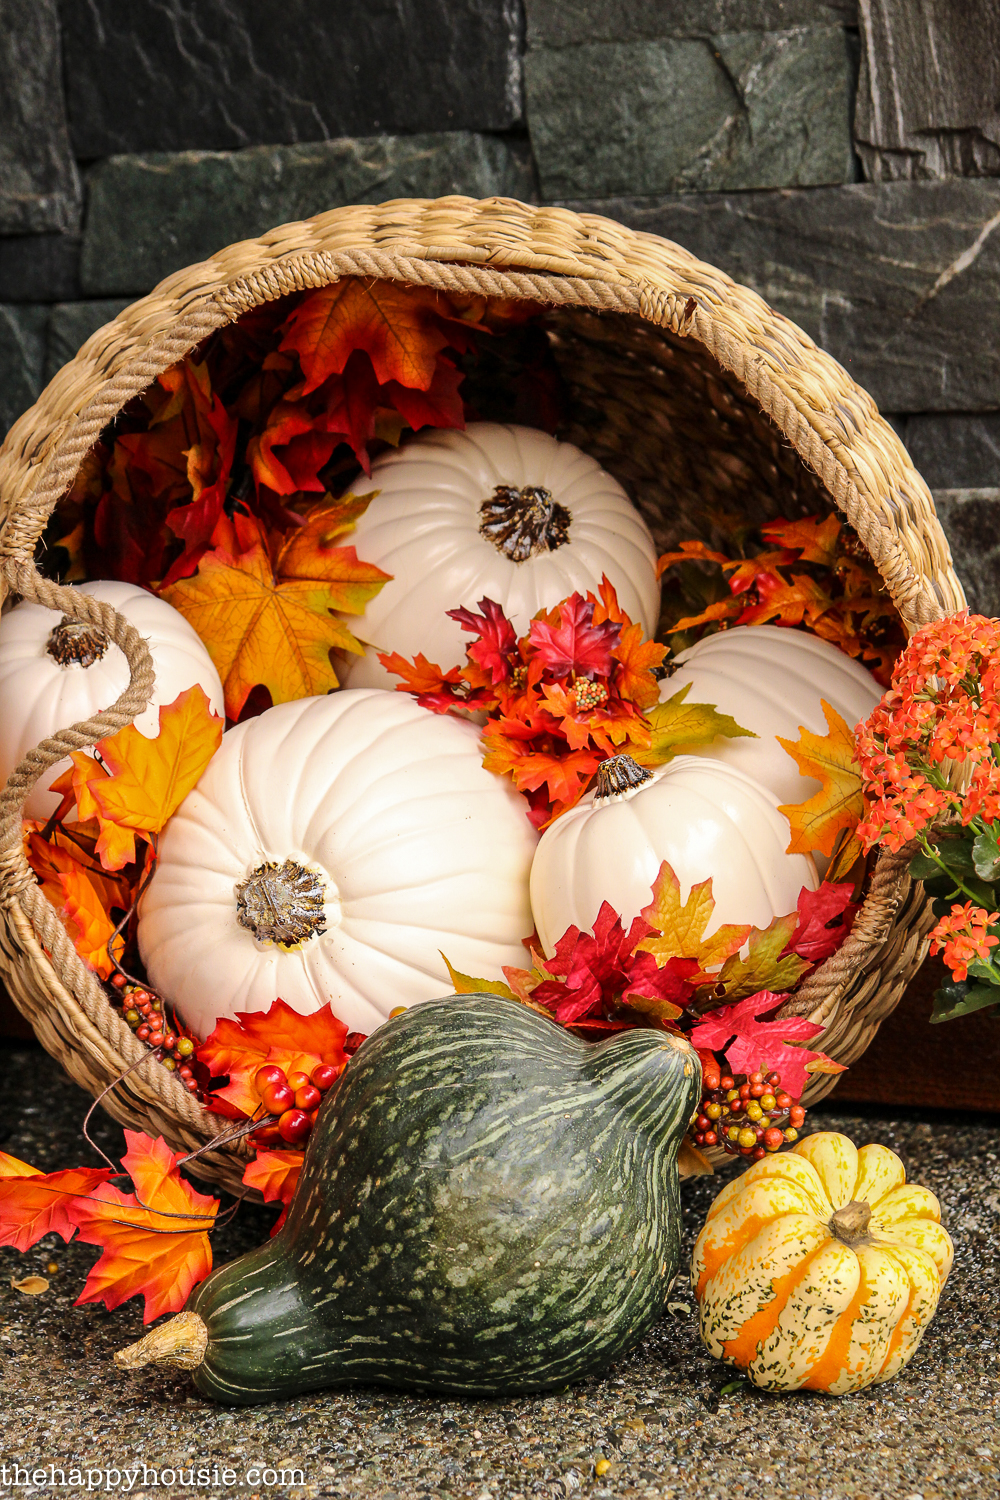 The basket is on its side with leaves and pumpkins spilling out onto the porch.